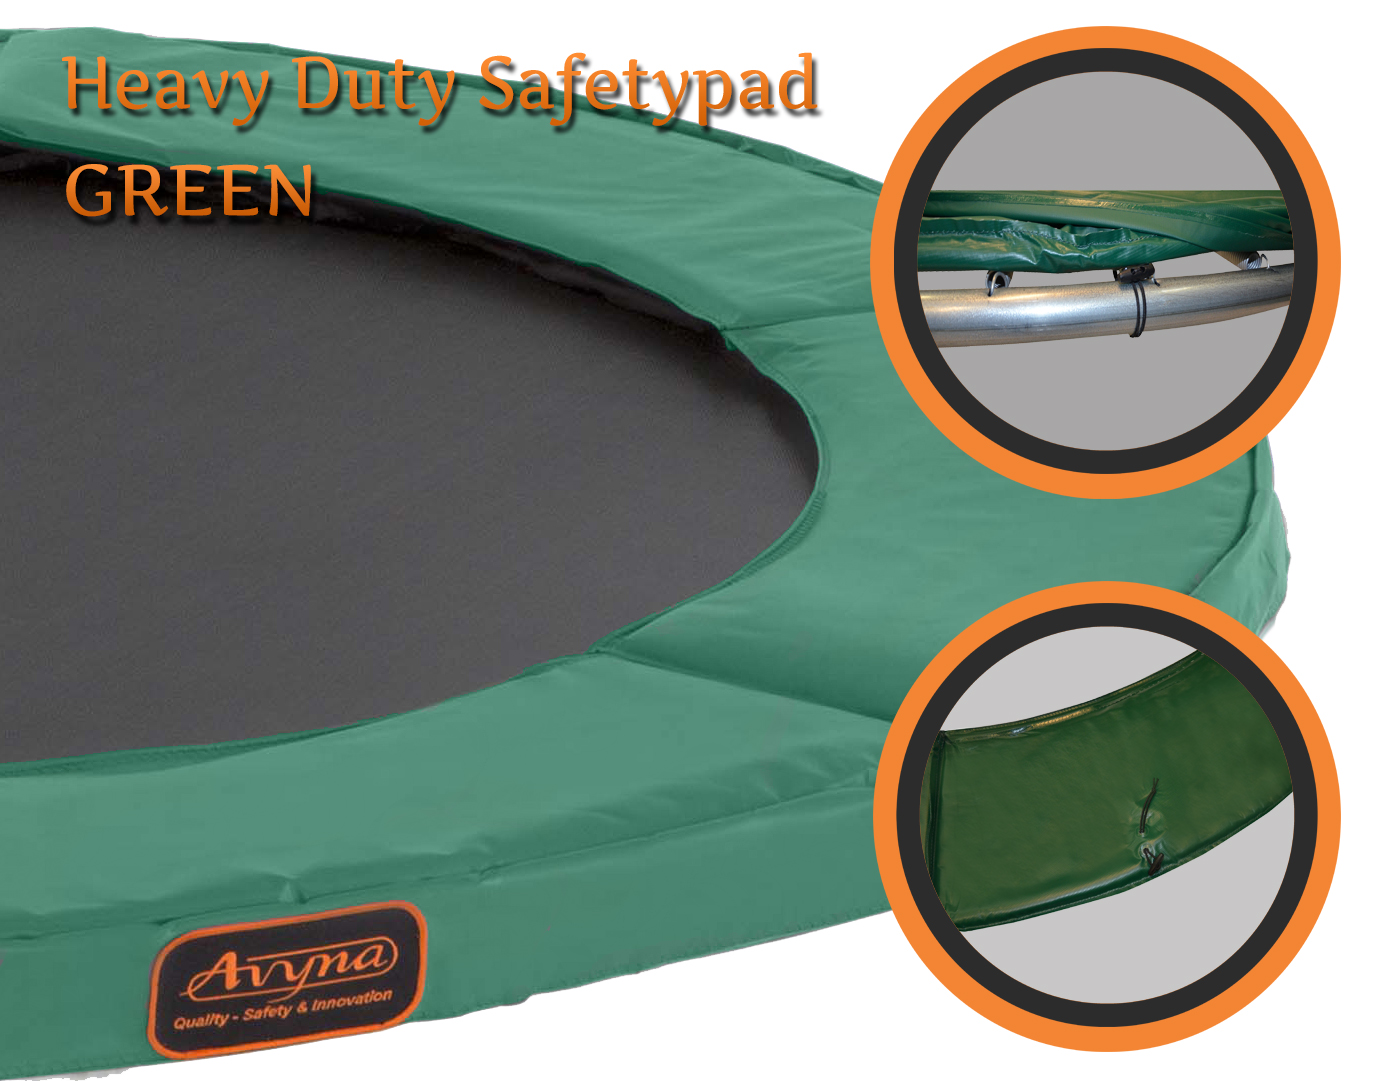 Universal Safety Pad 12,5ft Heavy Duty Green